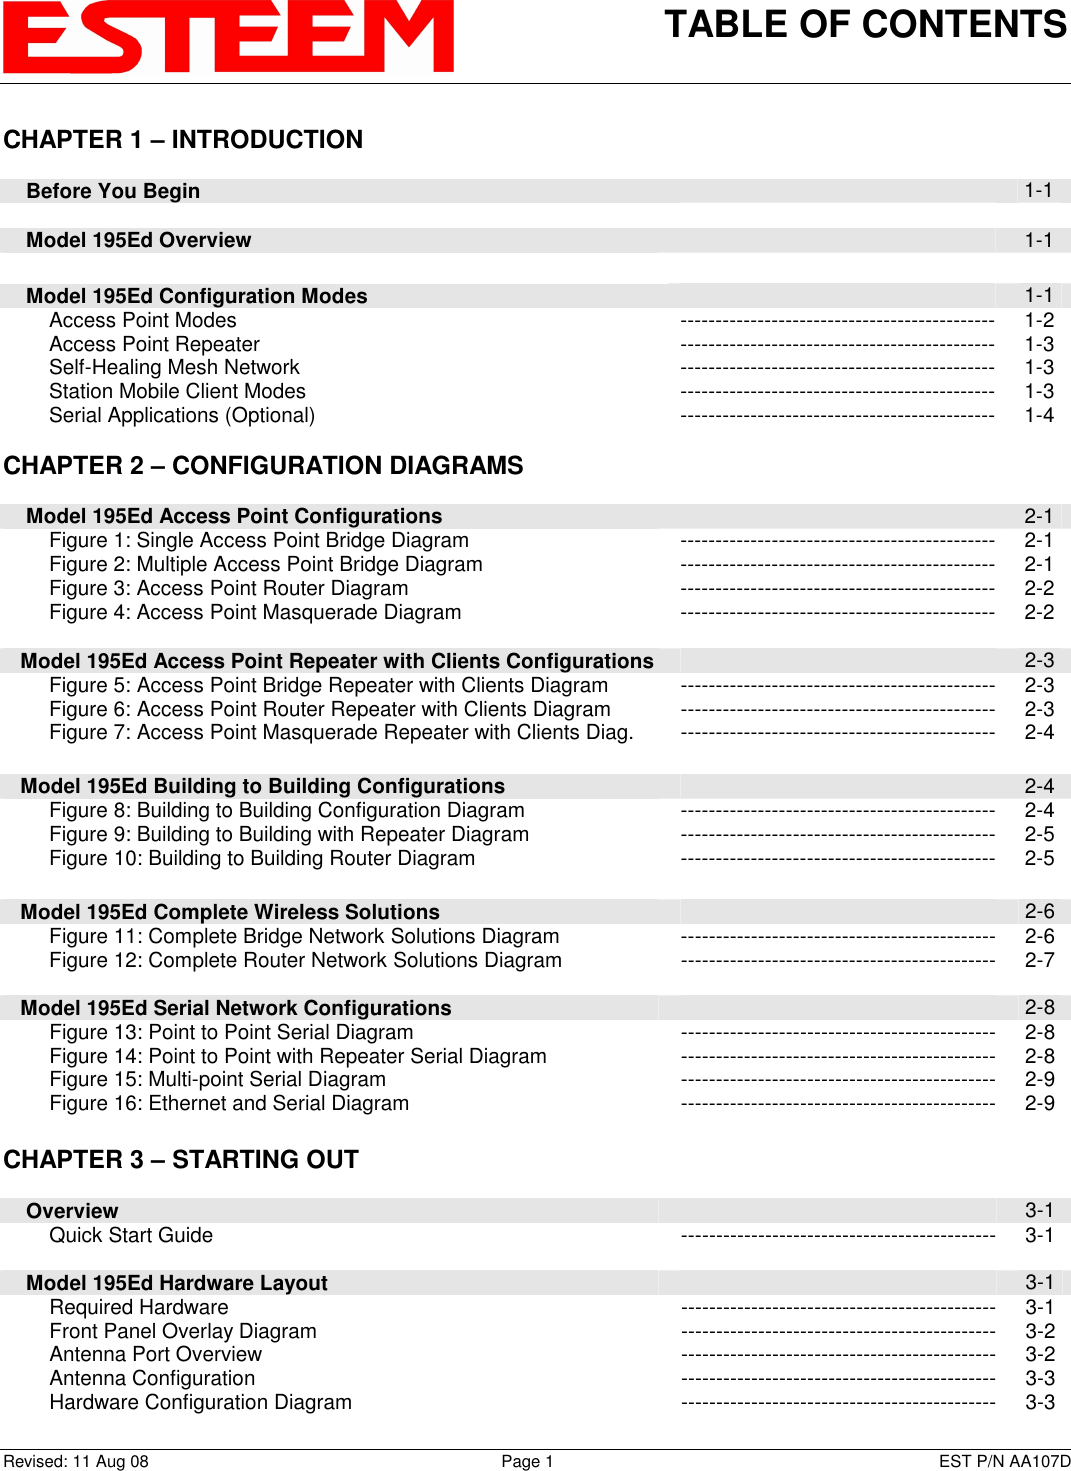 TABLE OF CONTENTS    Revised: 11 Aug 08  Page 1  EST P/N AA107D CHAPTER 1 – INTRODUCTION      Before You Begin   1-1      Model 195Ed Overview   1-1         Model 195Ed Configuration Modes   1-1         Access Point Modes  --------------------------------------------- 1-2         Access Point Repeater  --------------------------------------------- 1-3         Self-Healing Mesh Network  --------------------------------------------- 1-3         Station Mobile Client Modes  --------------------------------------------- 1-3         Serial Applications (Optional)  --------------------------------------------- 1-4      CHAPTER 2 – CONFIGURATION DIAGRAMS             Model 195Ed Access Point Configurations   2-1         Figure 1: Single Access Point Bridge Diagram  --------------------------------------------- 2-1         Figure 2: Multiple Access Point Bridge Diagram  --------------------------------------------- 2-1         Figure 3: Access Point Router Diagram  --------------------------------------------- 2-2         Figure 4: Access Point Masquerade Diagram  --------------------------------------------- 2-2        Model 195Ed Access Point Repeater with Clients Configurations   2-3         Figure 5: Access Point Bridge Repeater with Clients Diagram  --------------------------------------------- 2-3         Figure 6: Access Point Router Repeater with Clients Diagram  --------------------------------------------- 2-3         Figure 7: Access Point Masquerade Repeater with Clients Diag.  --------------------------------------------- 2-4        Model 195Ed Building to Building Configurations   2-4         Figure 8: Building to Building Configuration Diagram  --------------------------------------------- 2-4         Figure 9: Building to Building with Repeater Diagram  --------------------------------------------- 2-5         Figure 10: Building to Building Router Diagram  --------------------------------------------- 2-5        Model 195Ed Complete Wireless Solutions   2-6         Figure 11: Complete Bridge Network Solutions Diagram  --------------------------------------------- 2-6         Figure 12: Complete Router Network Solutions Diagram  --------------------------------------------- 2-7         Model 195Ed Serial Network Configurations   2-8         Figure 13: Point to Point Serial Diagram  --------------------------------------------- 2-8         Figure 14: Point to Point with Repeater Serial Diagram  --------------------------------------------- 2-8         Figure 15: Multi-point Serial Diagram  --------------------------------------------- 2-9         Figure 16: Ethernet and Serial Diagram  --------------------------------------------- 2-9     CHAPTER 3 – STARTING OUT             Overview   3-1         Quick Start Guide  --------------------------------------------- 3-1          Model 195Ed Hardware Layout   3-1         Required Hardware  --------------------------------------------- 3-1         Front Panel Overlay Diagram  --------------------------------------------- 3-2         Antenna Port Overview  --------------------------------------------- 3-2         Antenna Configuration  --------------------------------------------- 3-3         Hardware Configuration Diagram  --------------------------------------------- 3-3 